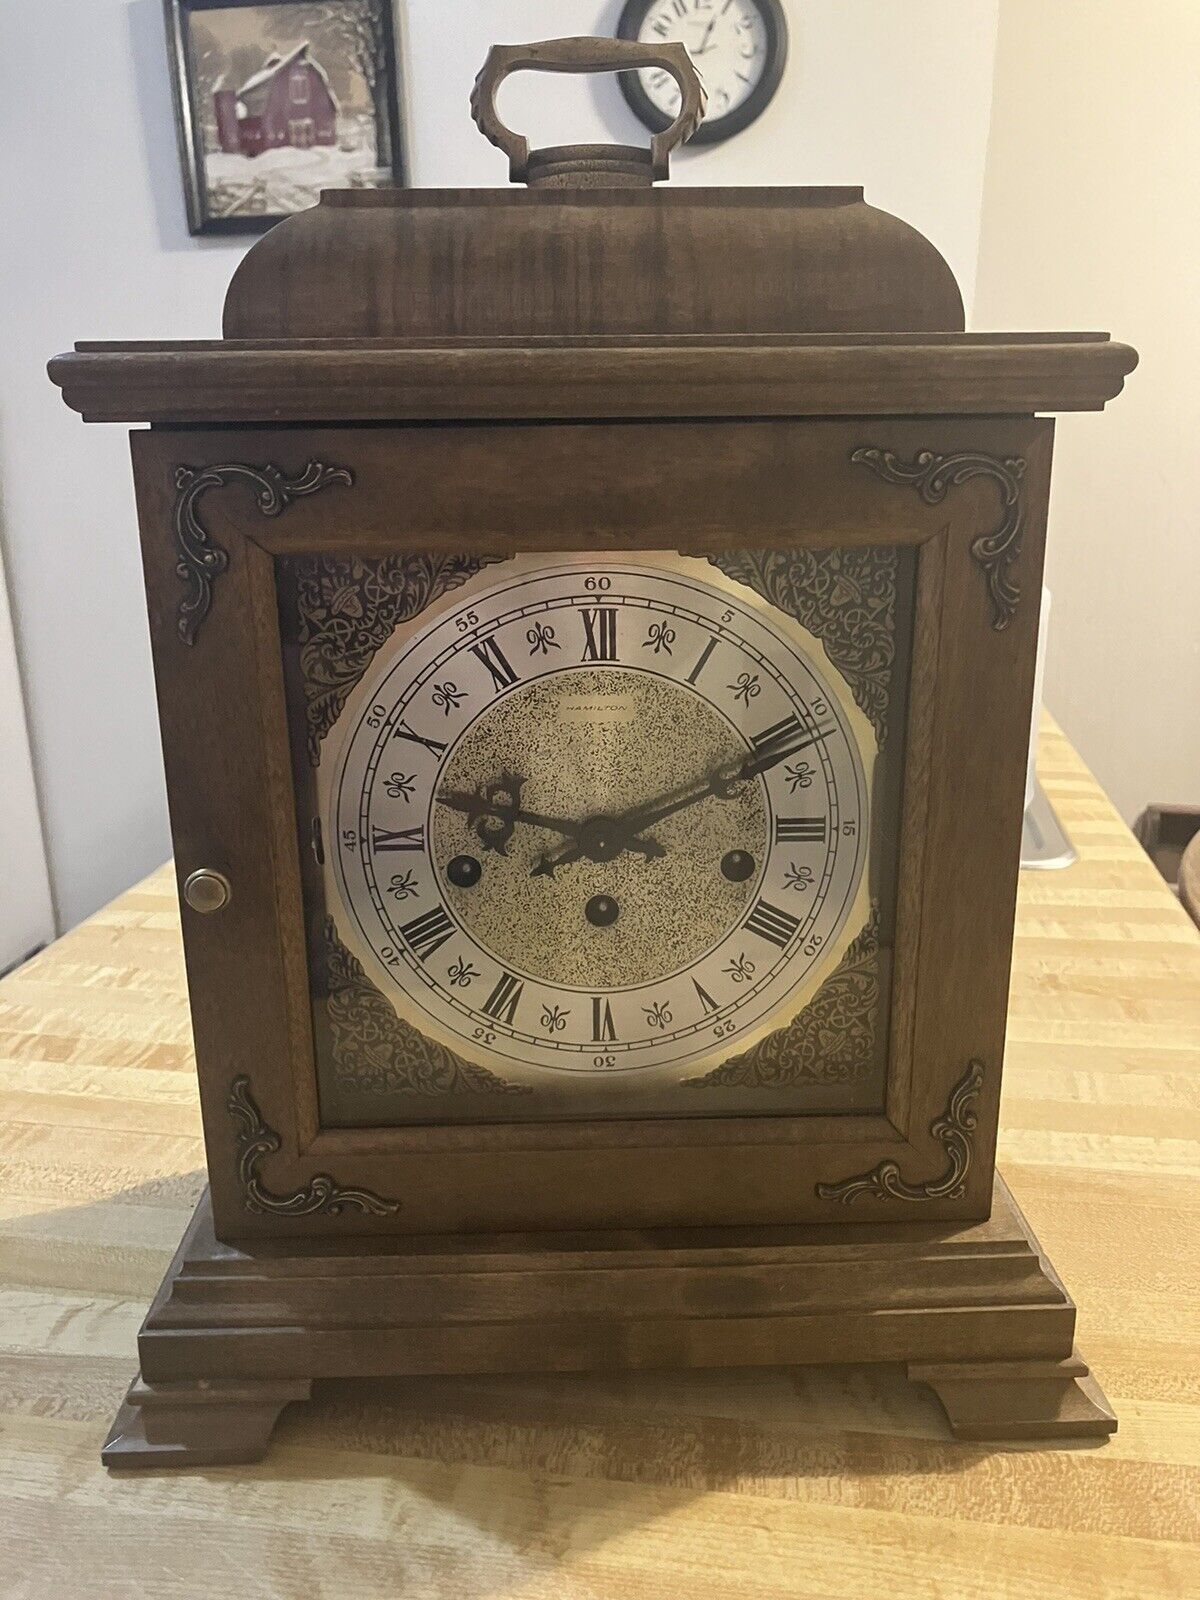 Hamilton Wheatland Clock - Westminster Chimes With Key Excellent Condition